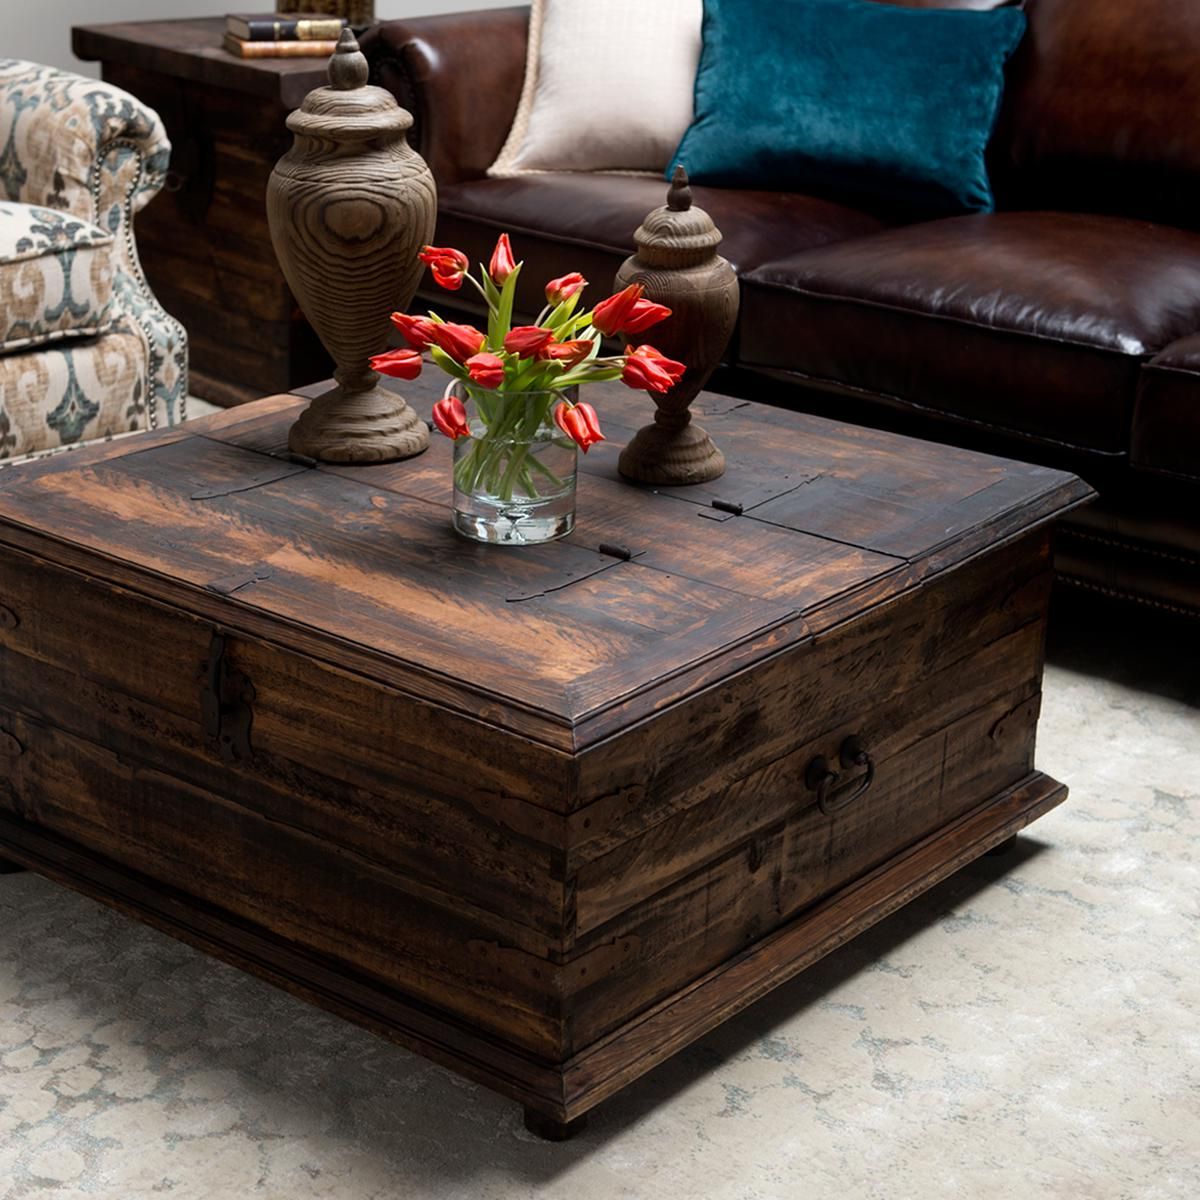 Rustic Trunk Coffee Table For Your Living Room – Homes Furniture Ideas With Rustic Wood Coffee Tables (Gallery 12 of 20)